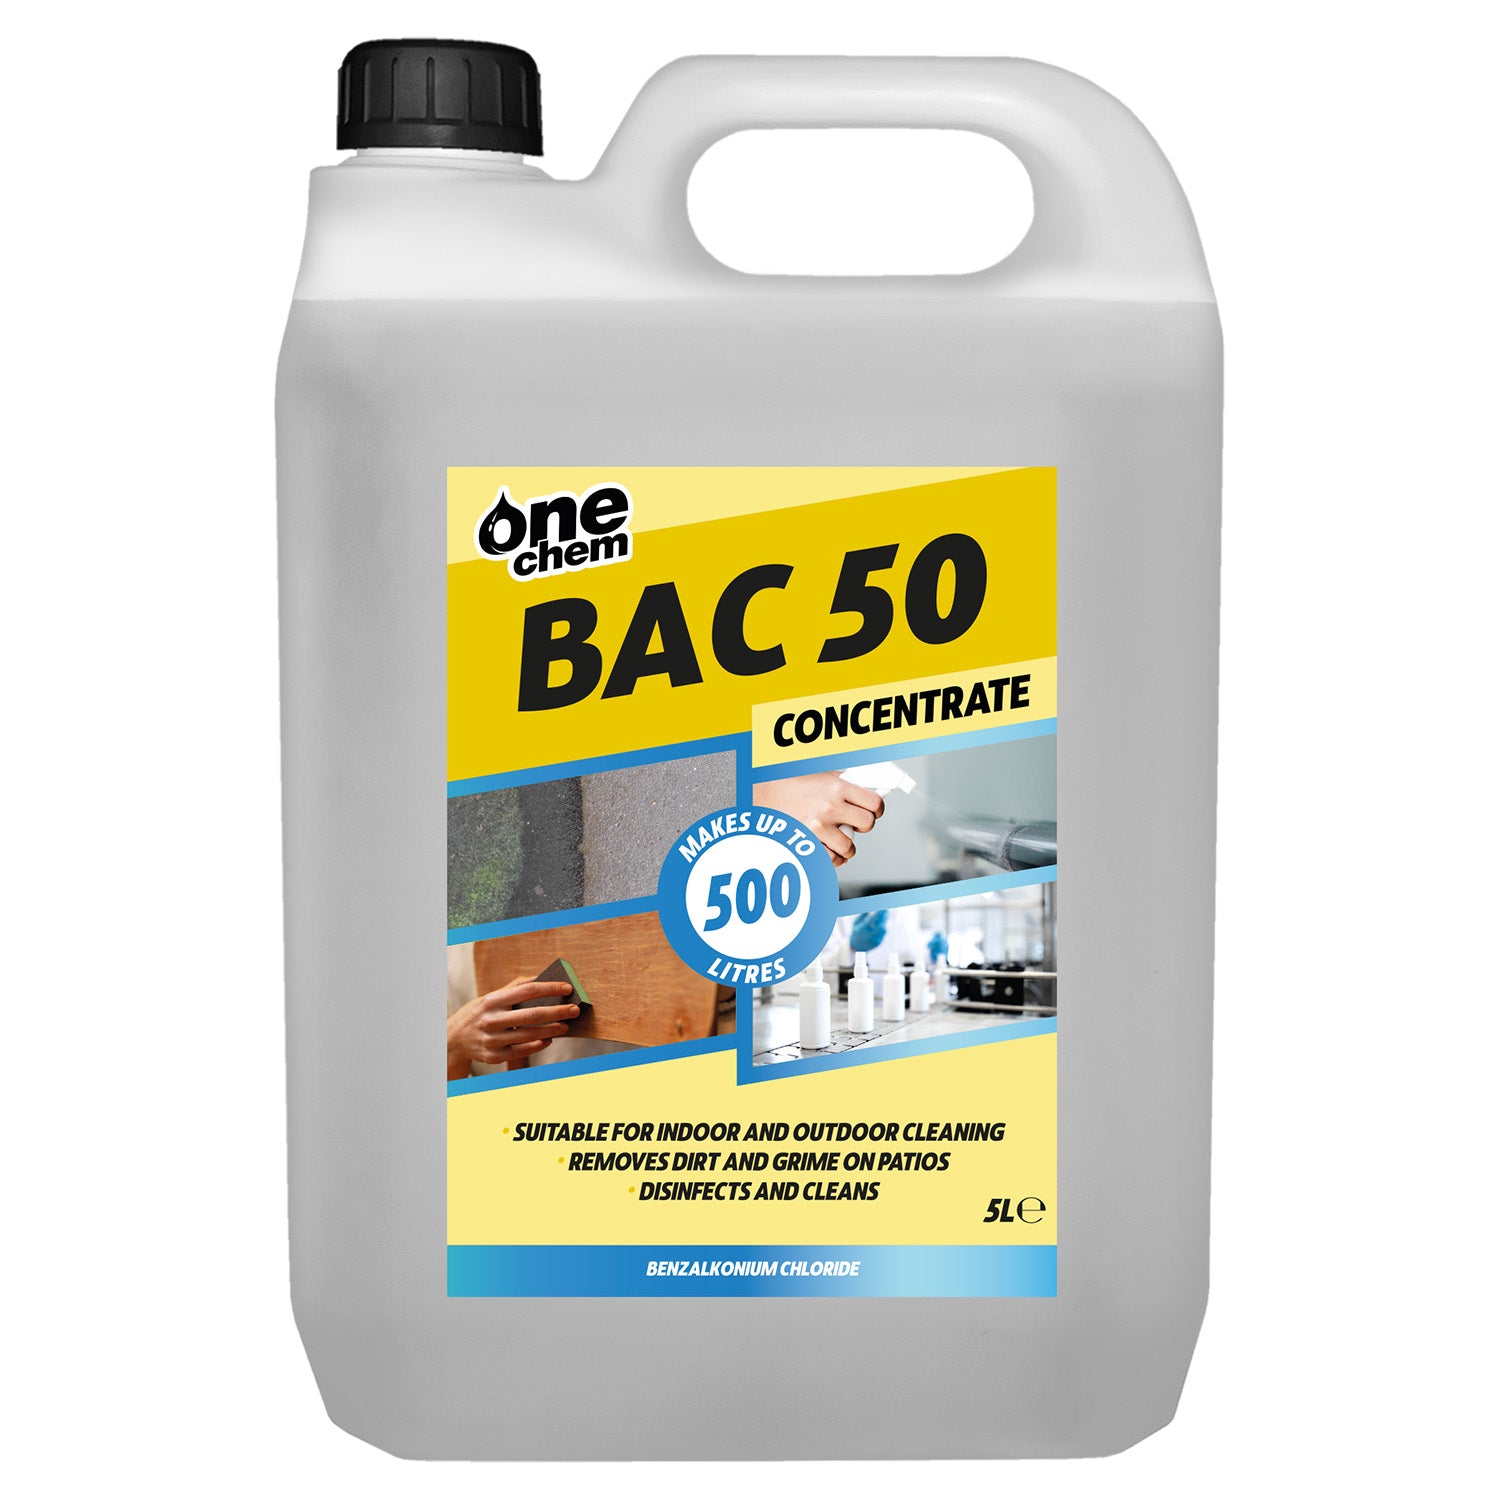 One Chem - BAC 50 Benzalkonium Chloride Concentrated 5L